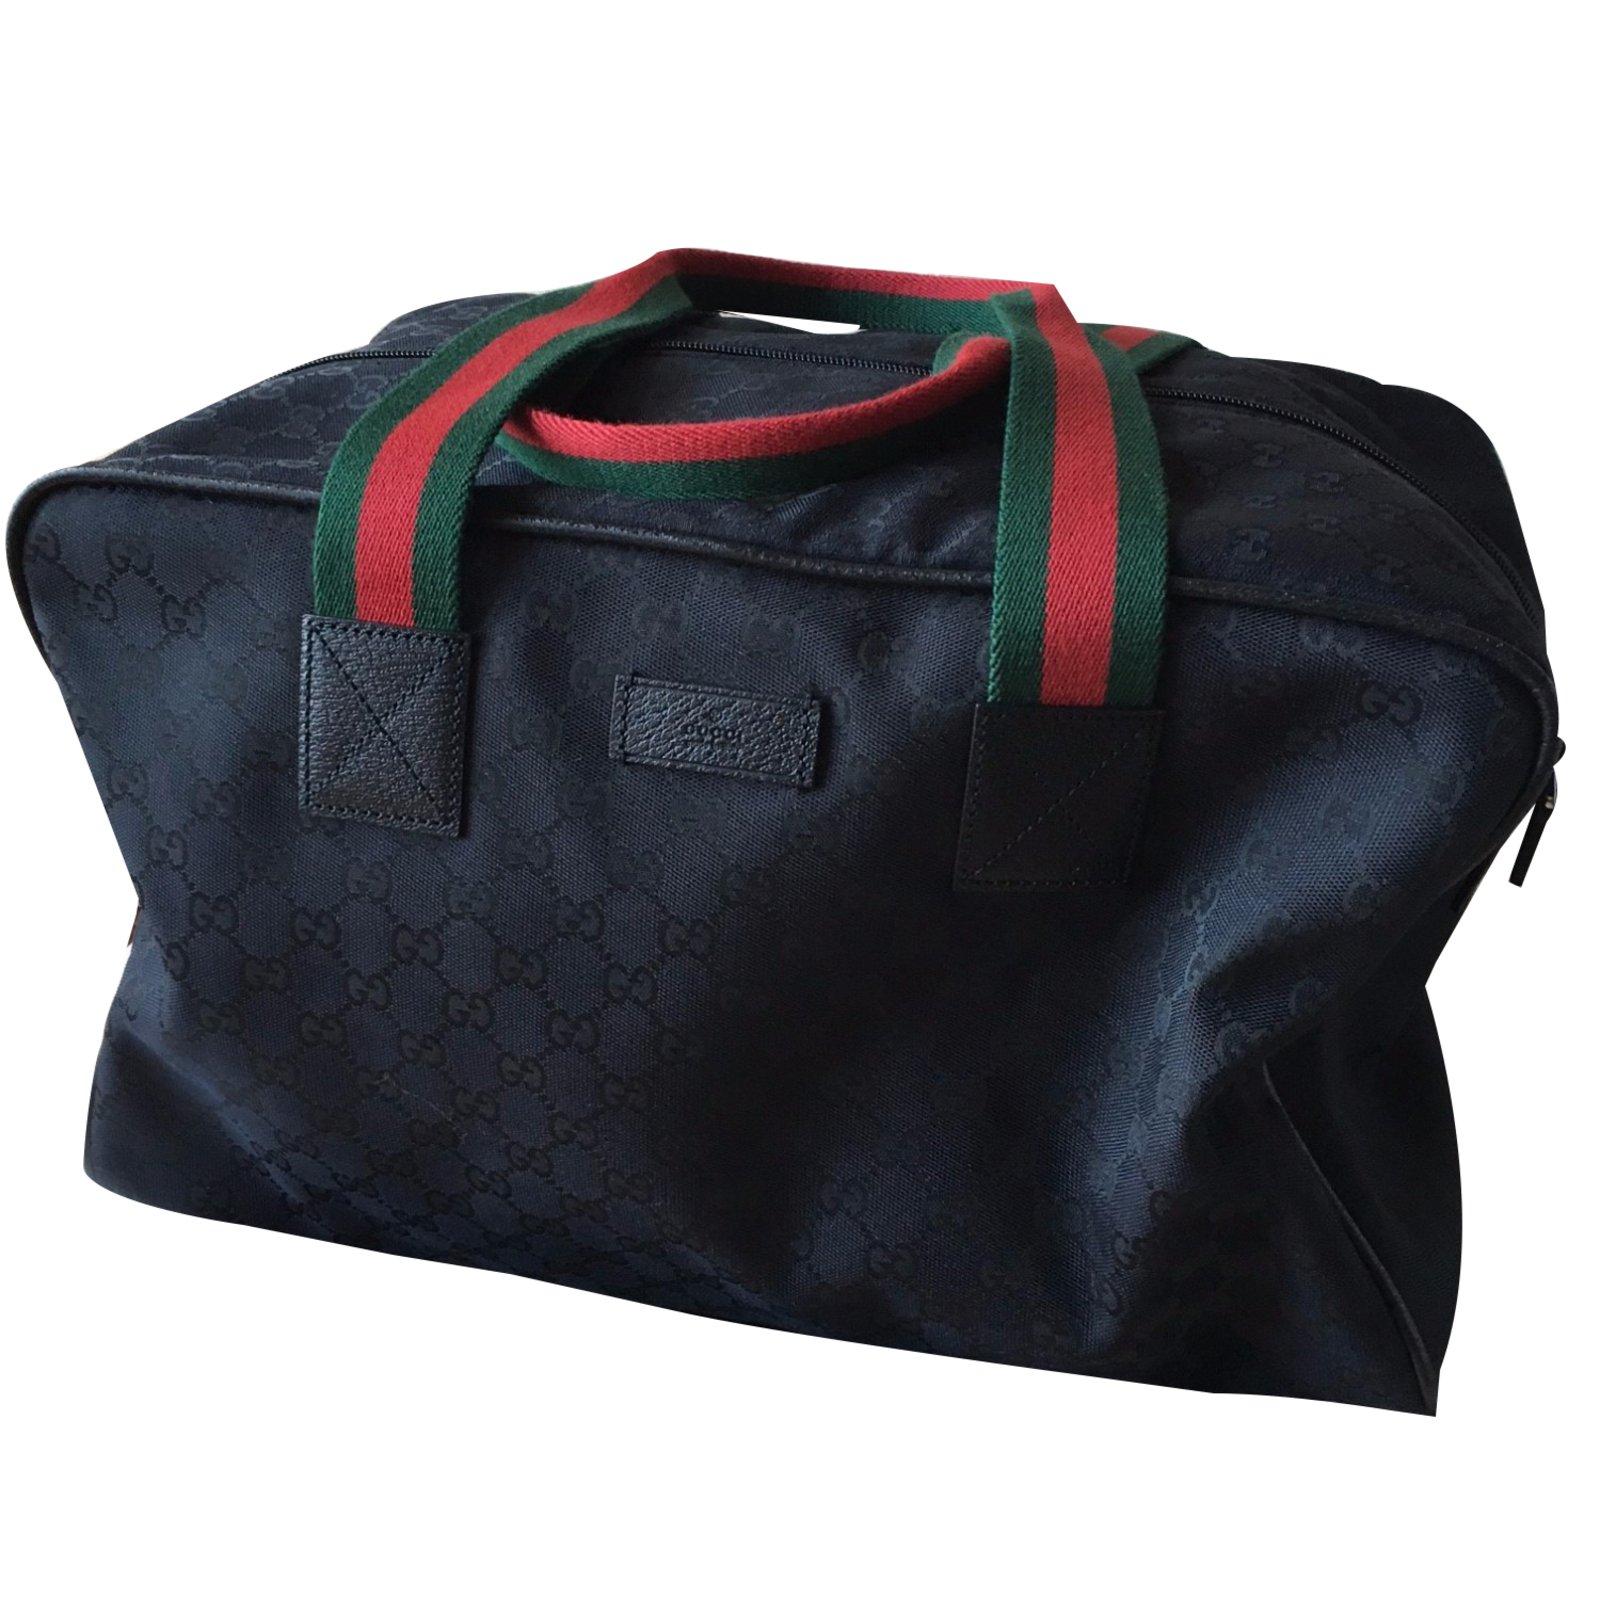 Gucci, Bags, Black Gucci Duffle Bag With Redgreen Handles